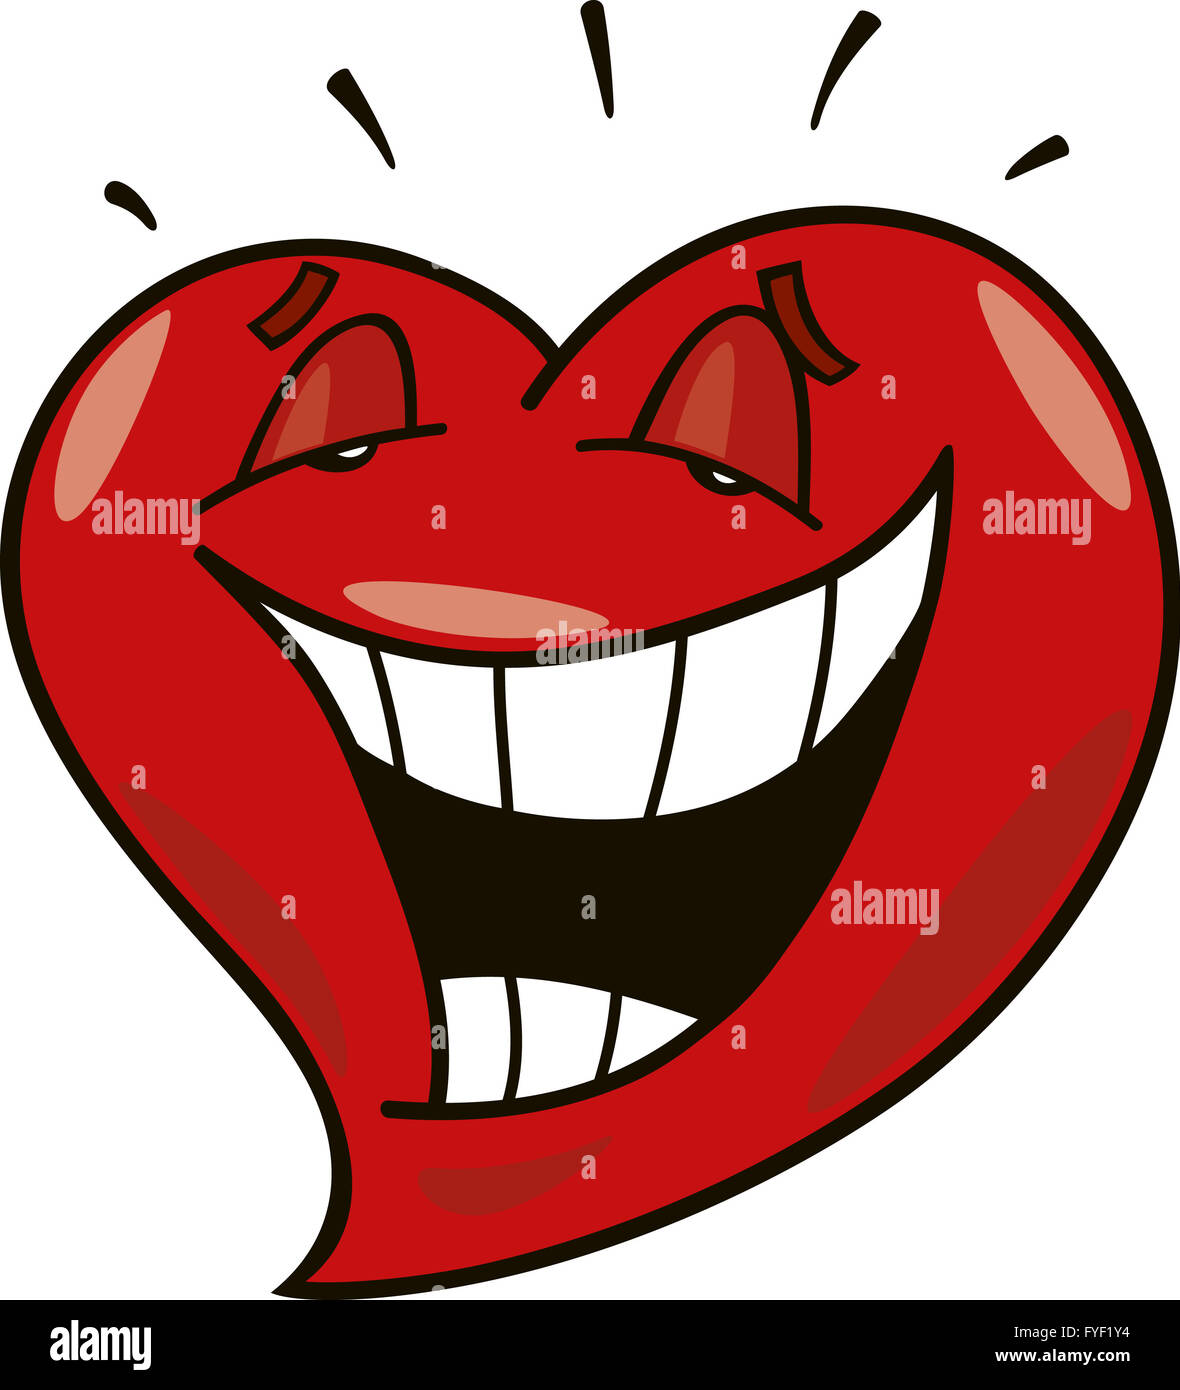 laughing heart Stock Photo